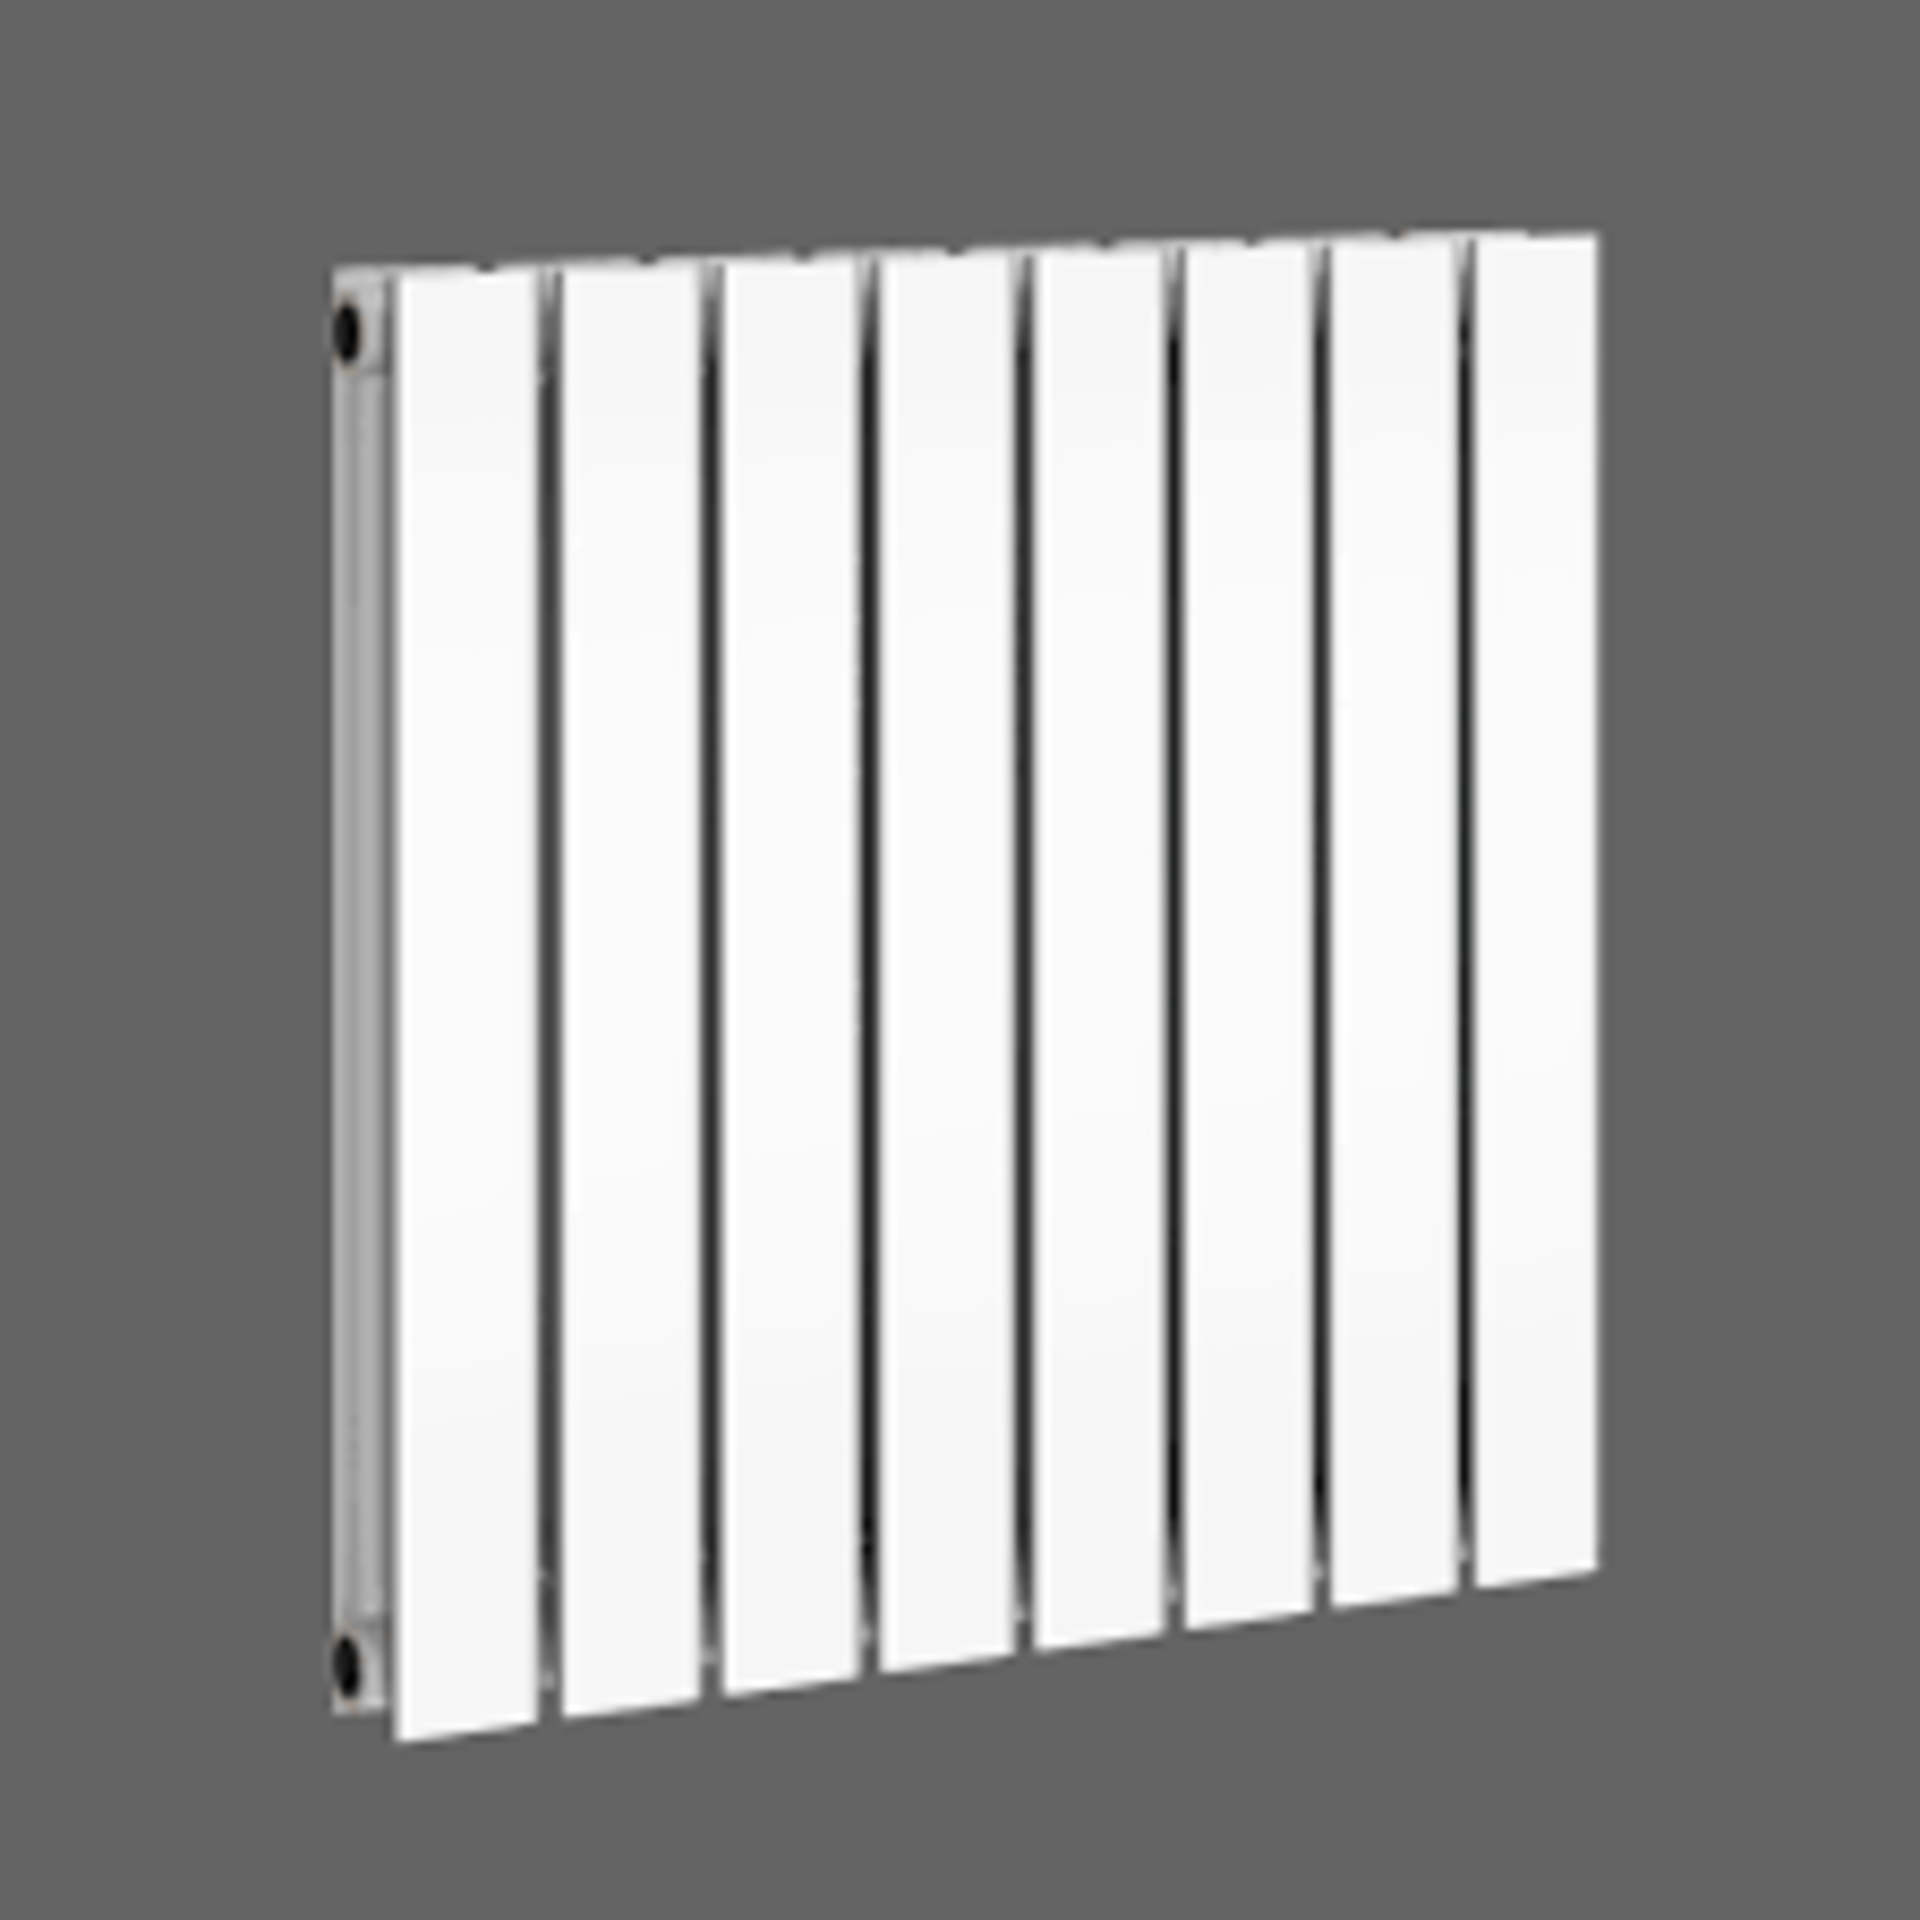 PALLET TO CONTAIN 5 x BRAND NEW BOXED 1800x532mm Gloss White Double Flat Panel Vertical Radiato... - Image 3 of 4